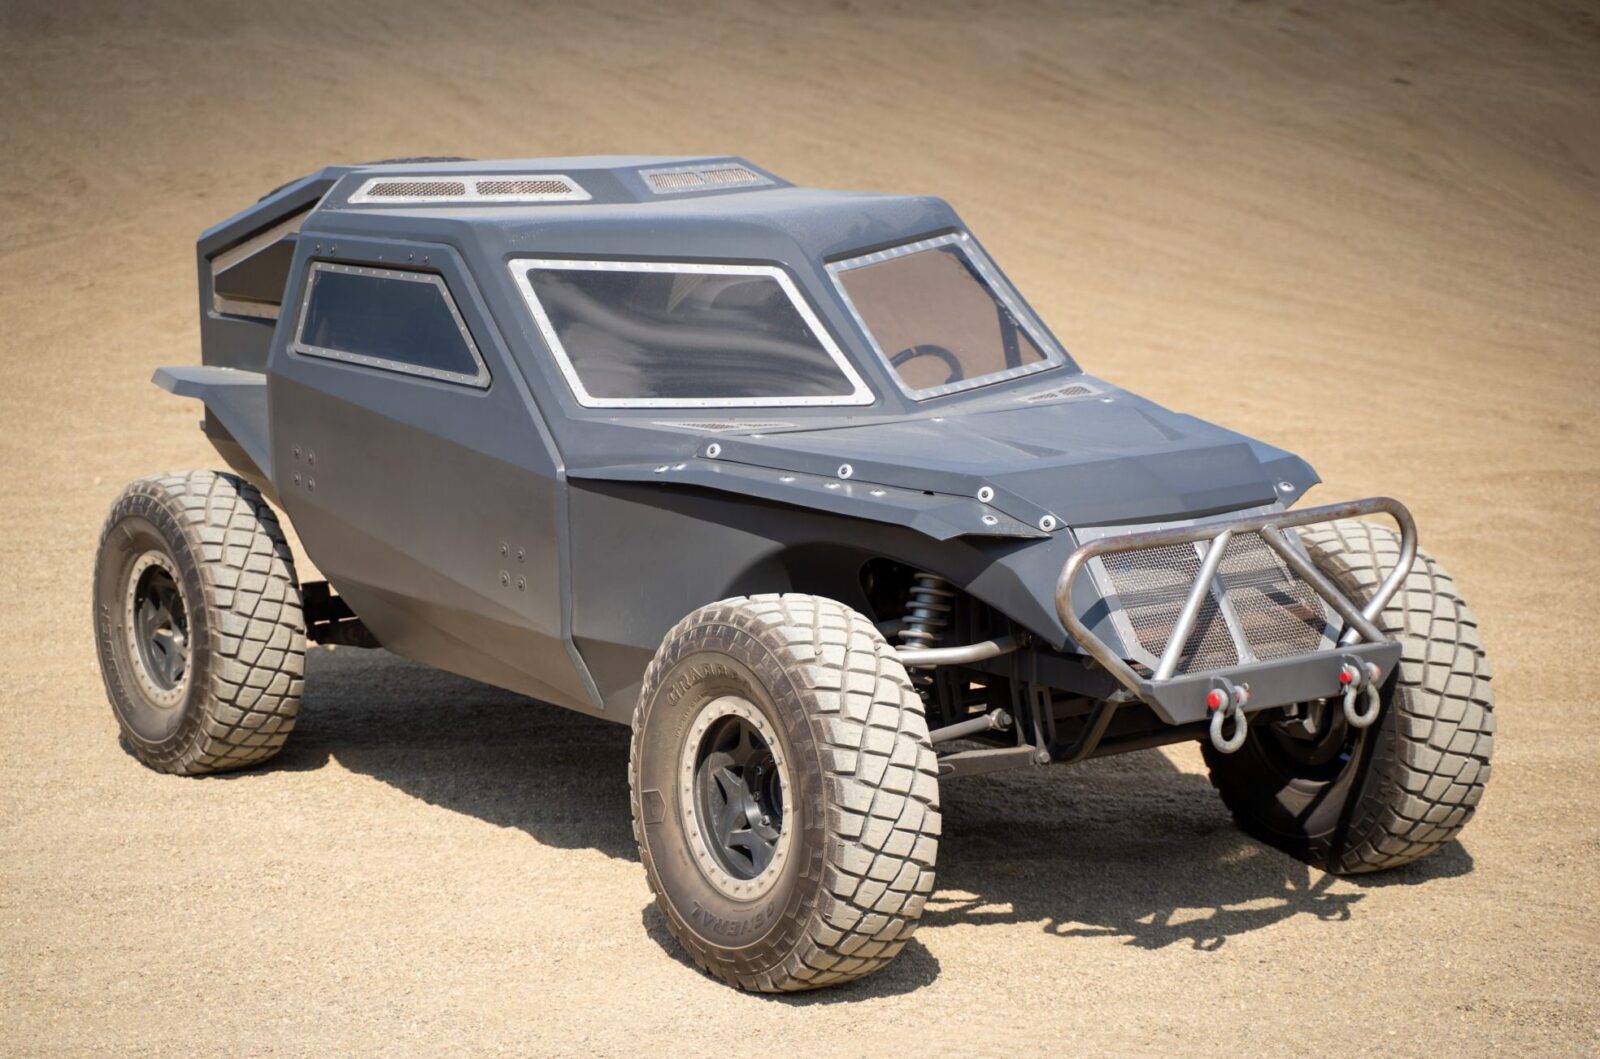 Fast Attack Buggy Furious 7 Movie